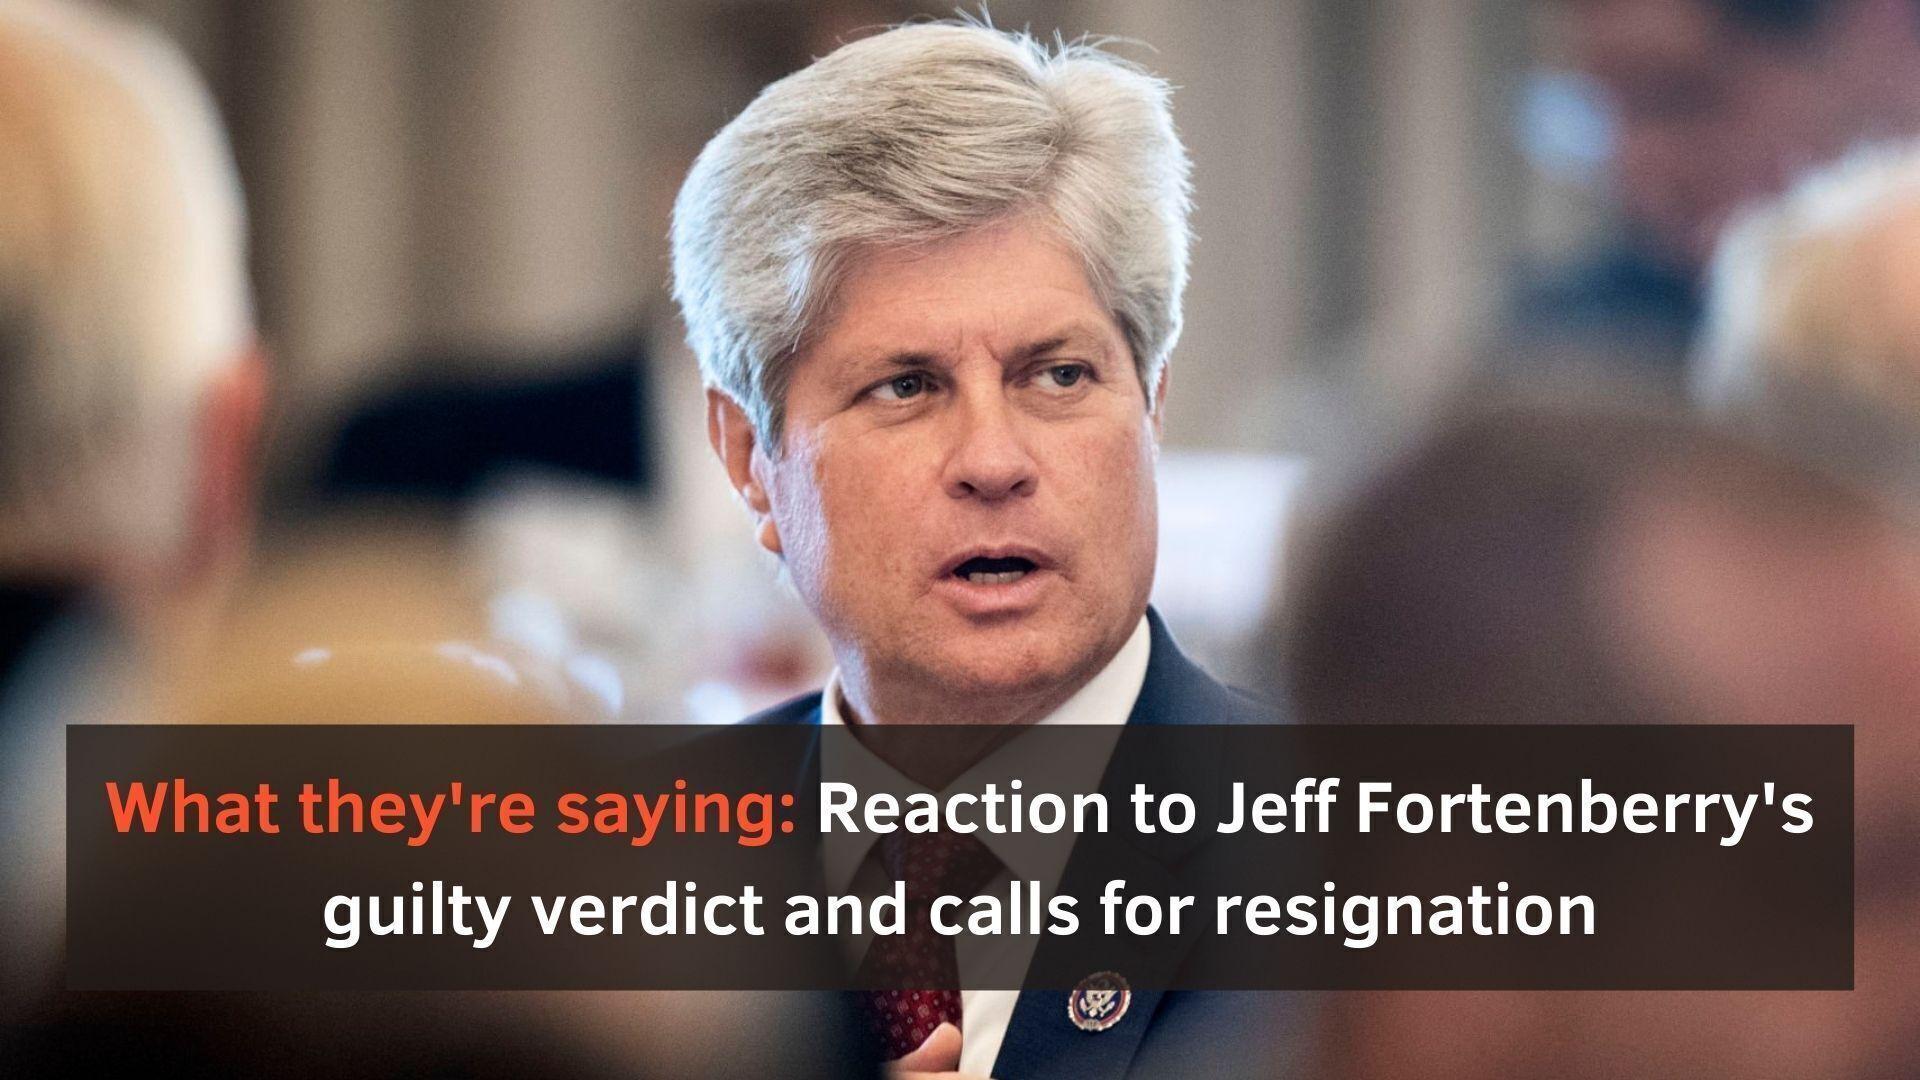 Fortenberry to resign from Congress after guilty verdicts in